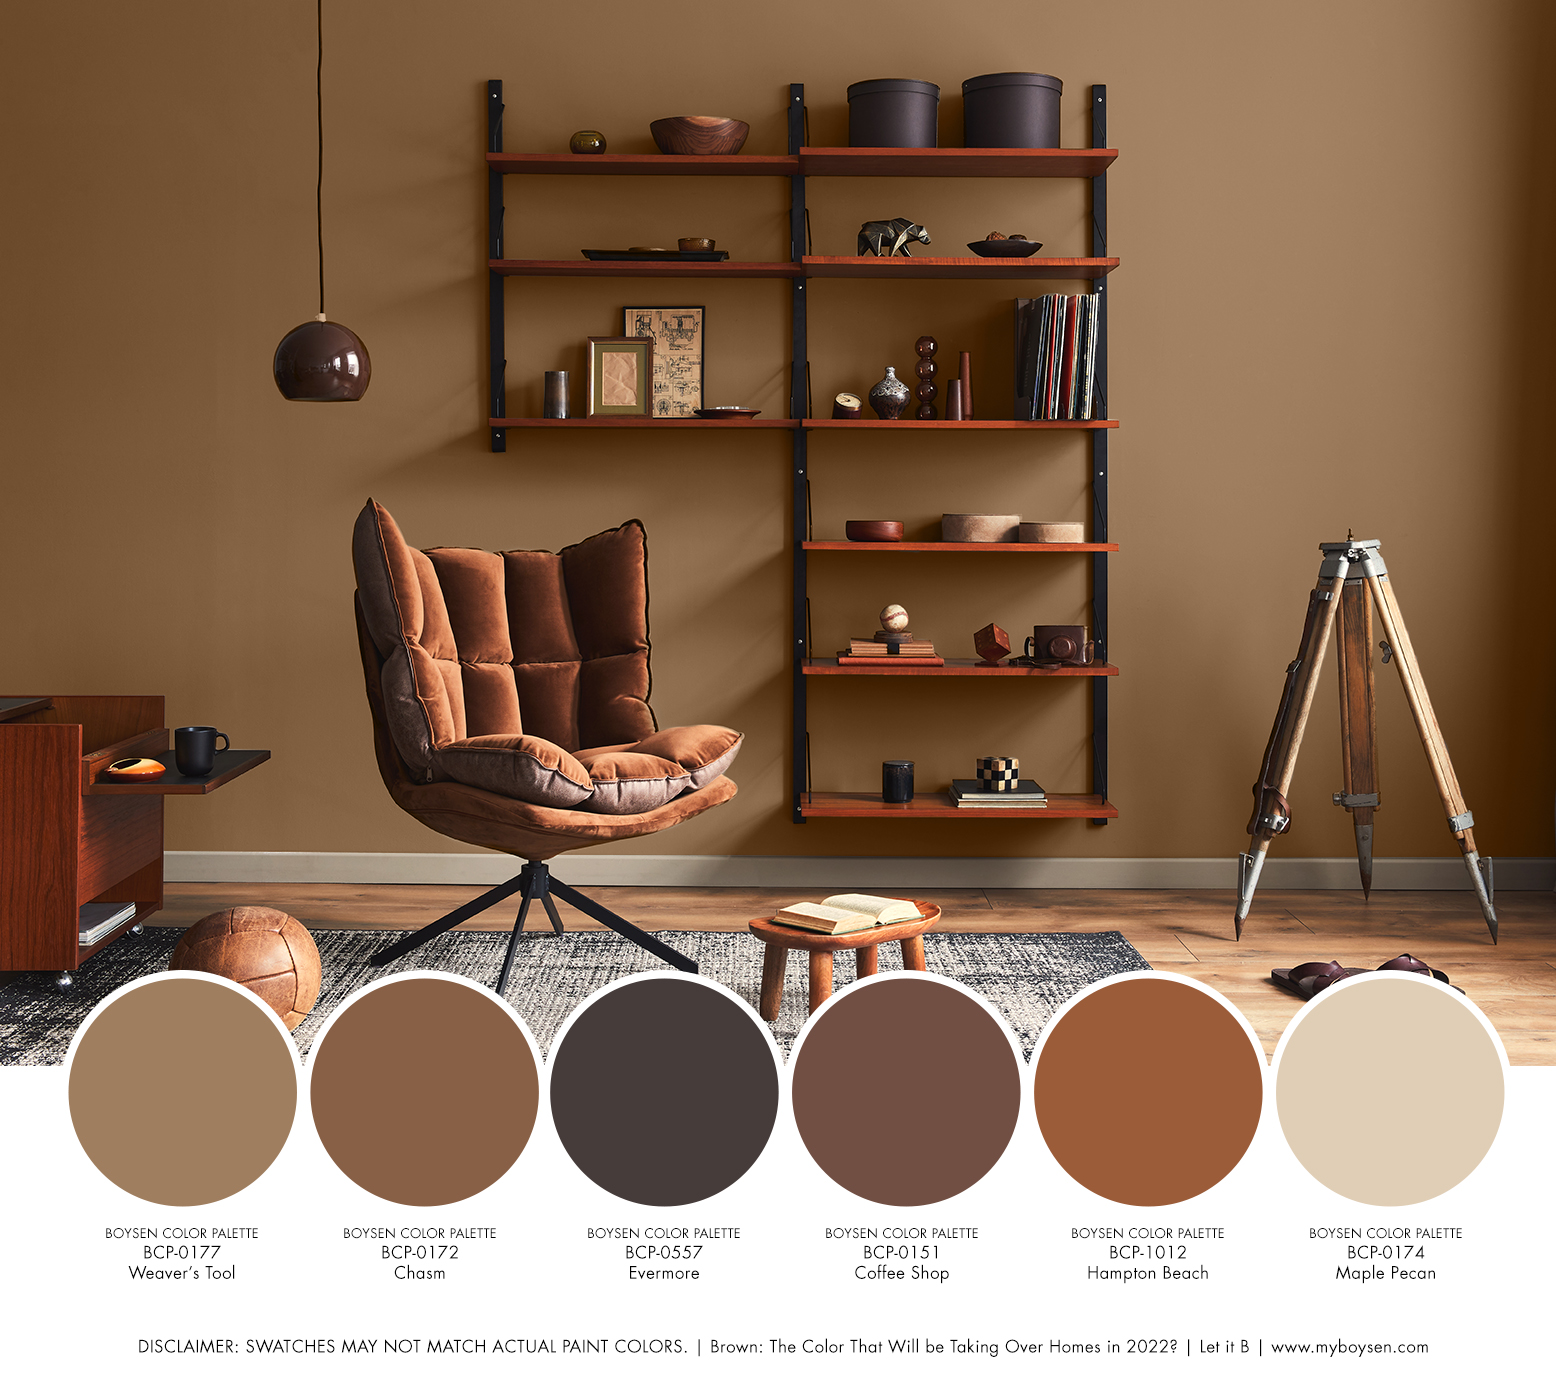 Brown: The Color That Will be Taking Over Homes in 2022? | MyBoysen